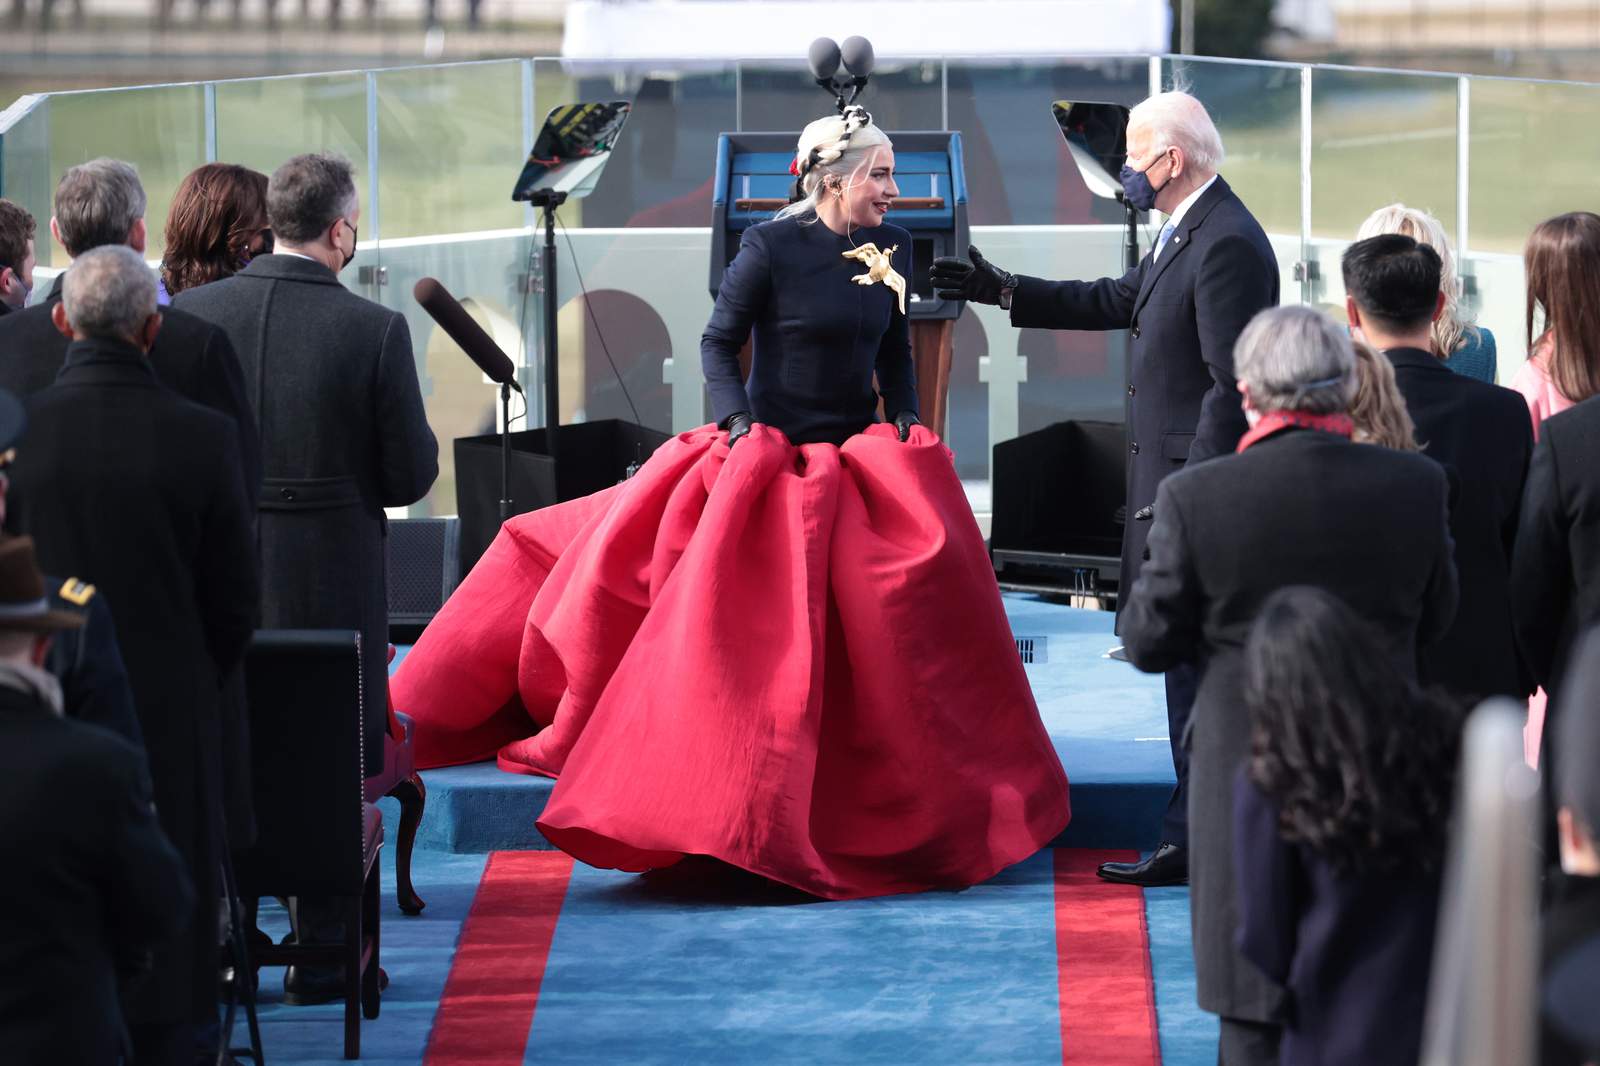 We saw some serious fashion moments at President Biden’s inauguration